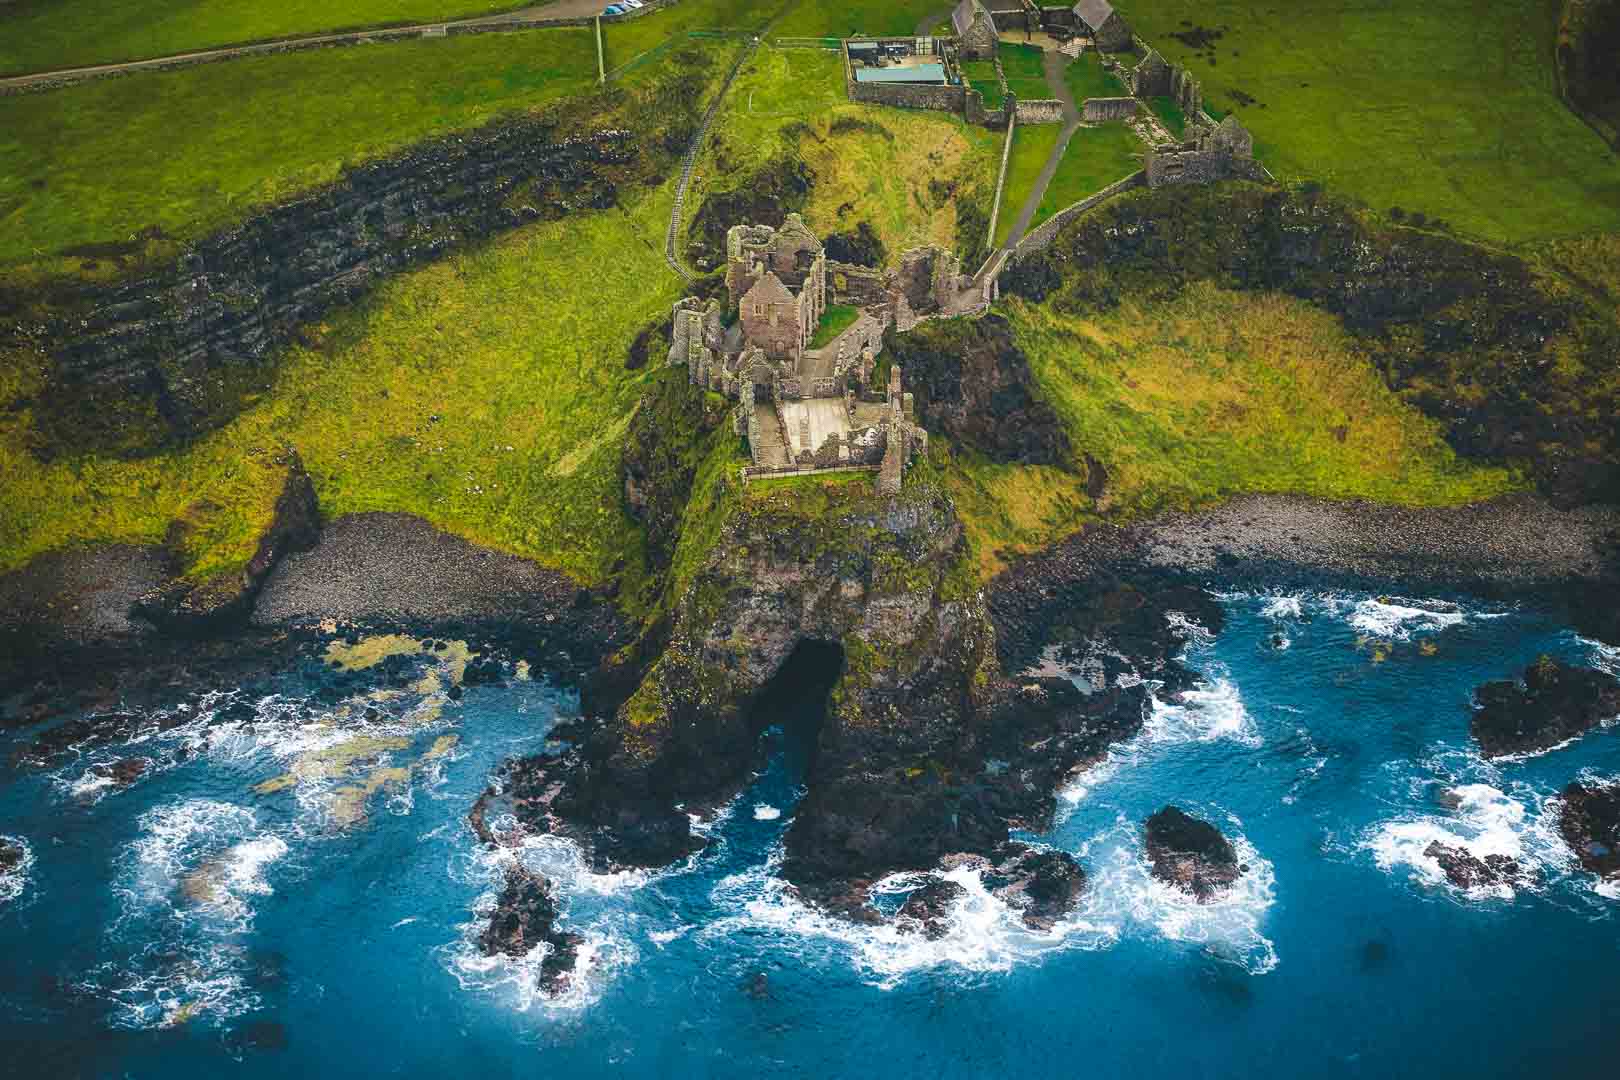 dunluce castle and the mermaids cave